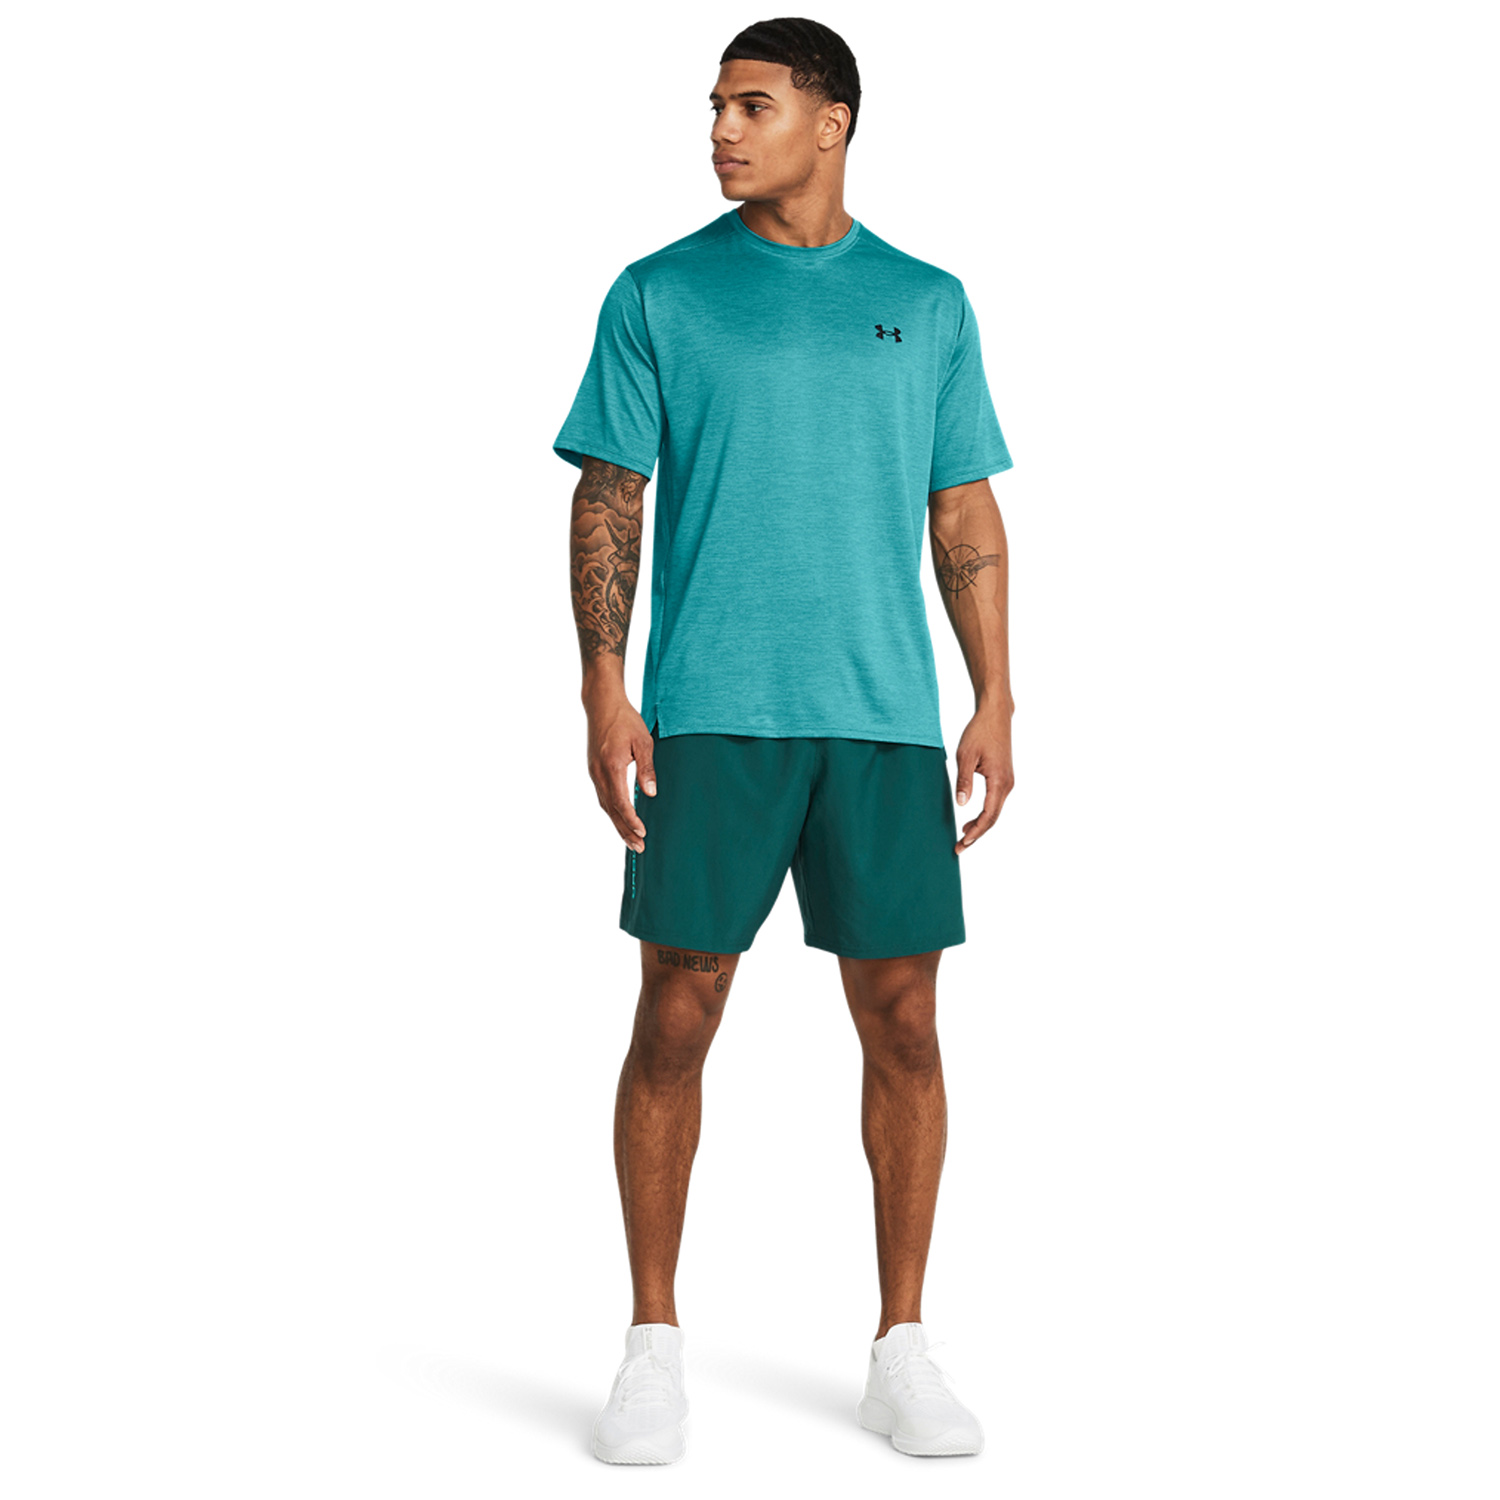 Under Armour Woven Split 9in Shorts - Hydro Teal/Radial Turquoise